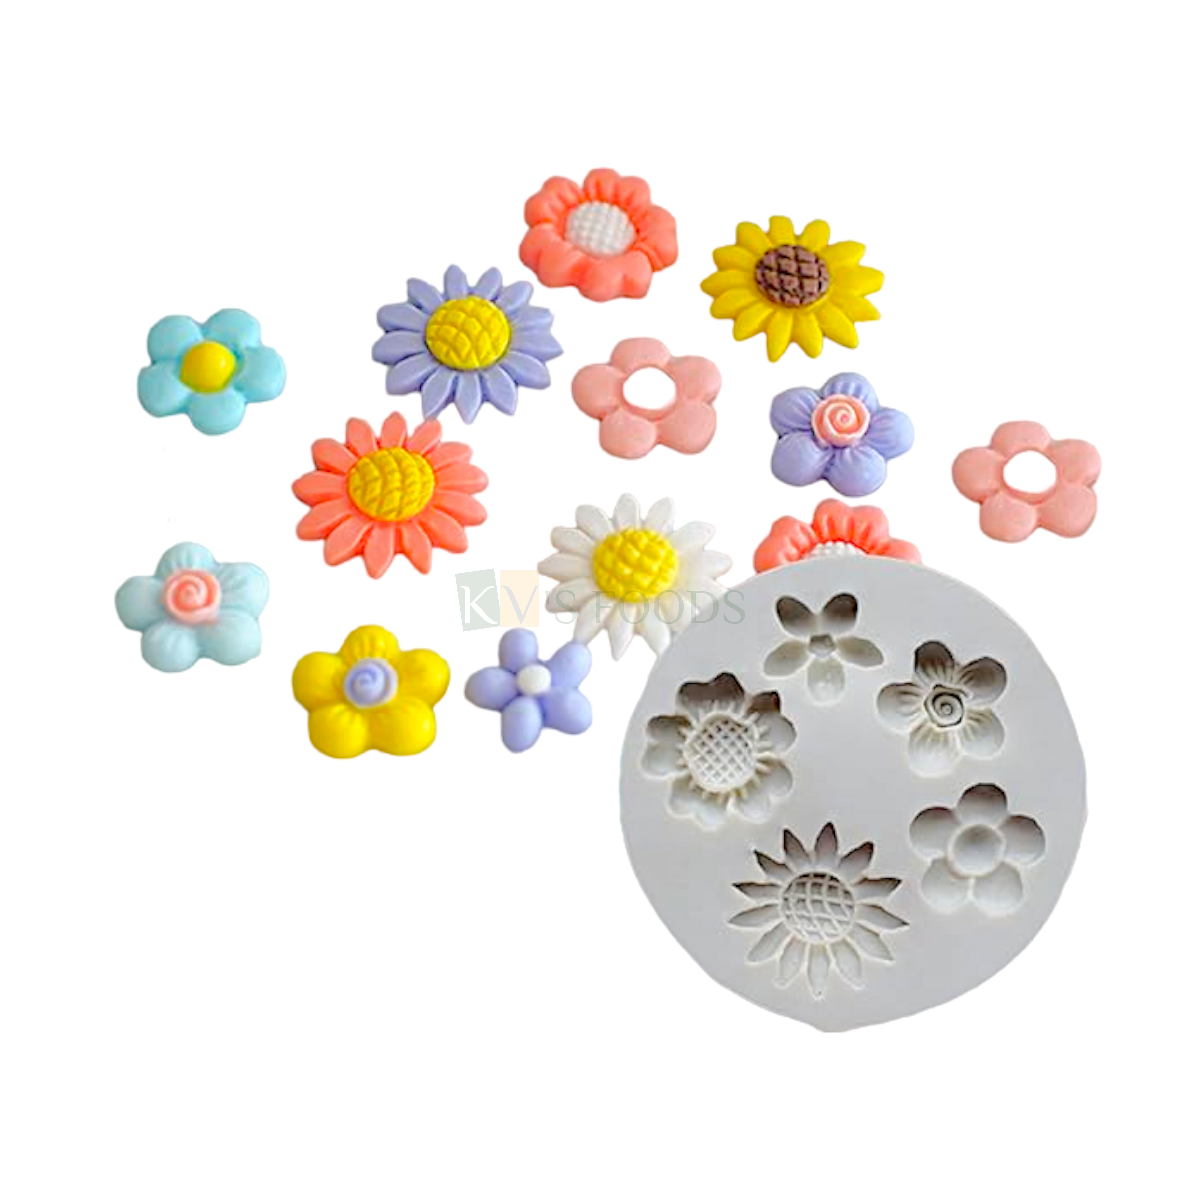 1 PC Silicone Fondant Small Sunflower Plum Different Flowers Chocolate Mould 5 Cavity, Wedding Anniversary Theme Colourful Flowers Cupcake Theme Garden Theme Cakes Happy Birthday Theme Flexible Moulds